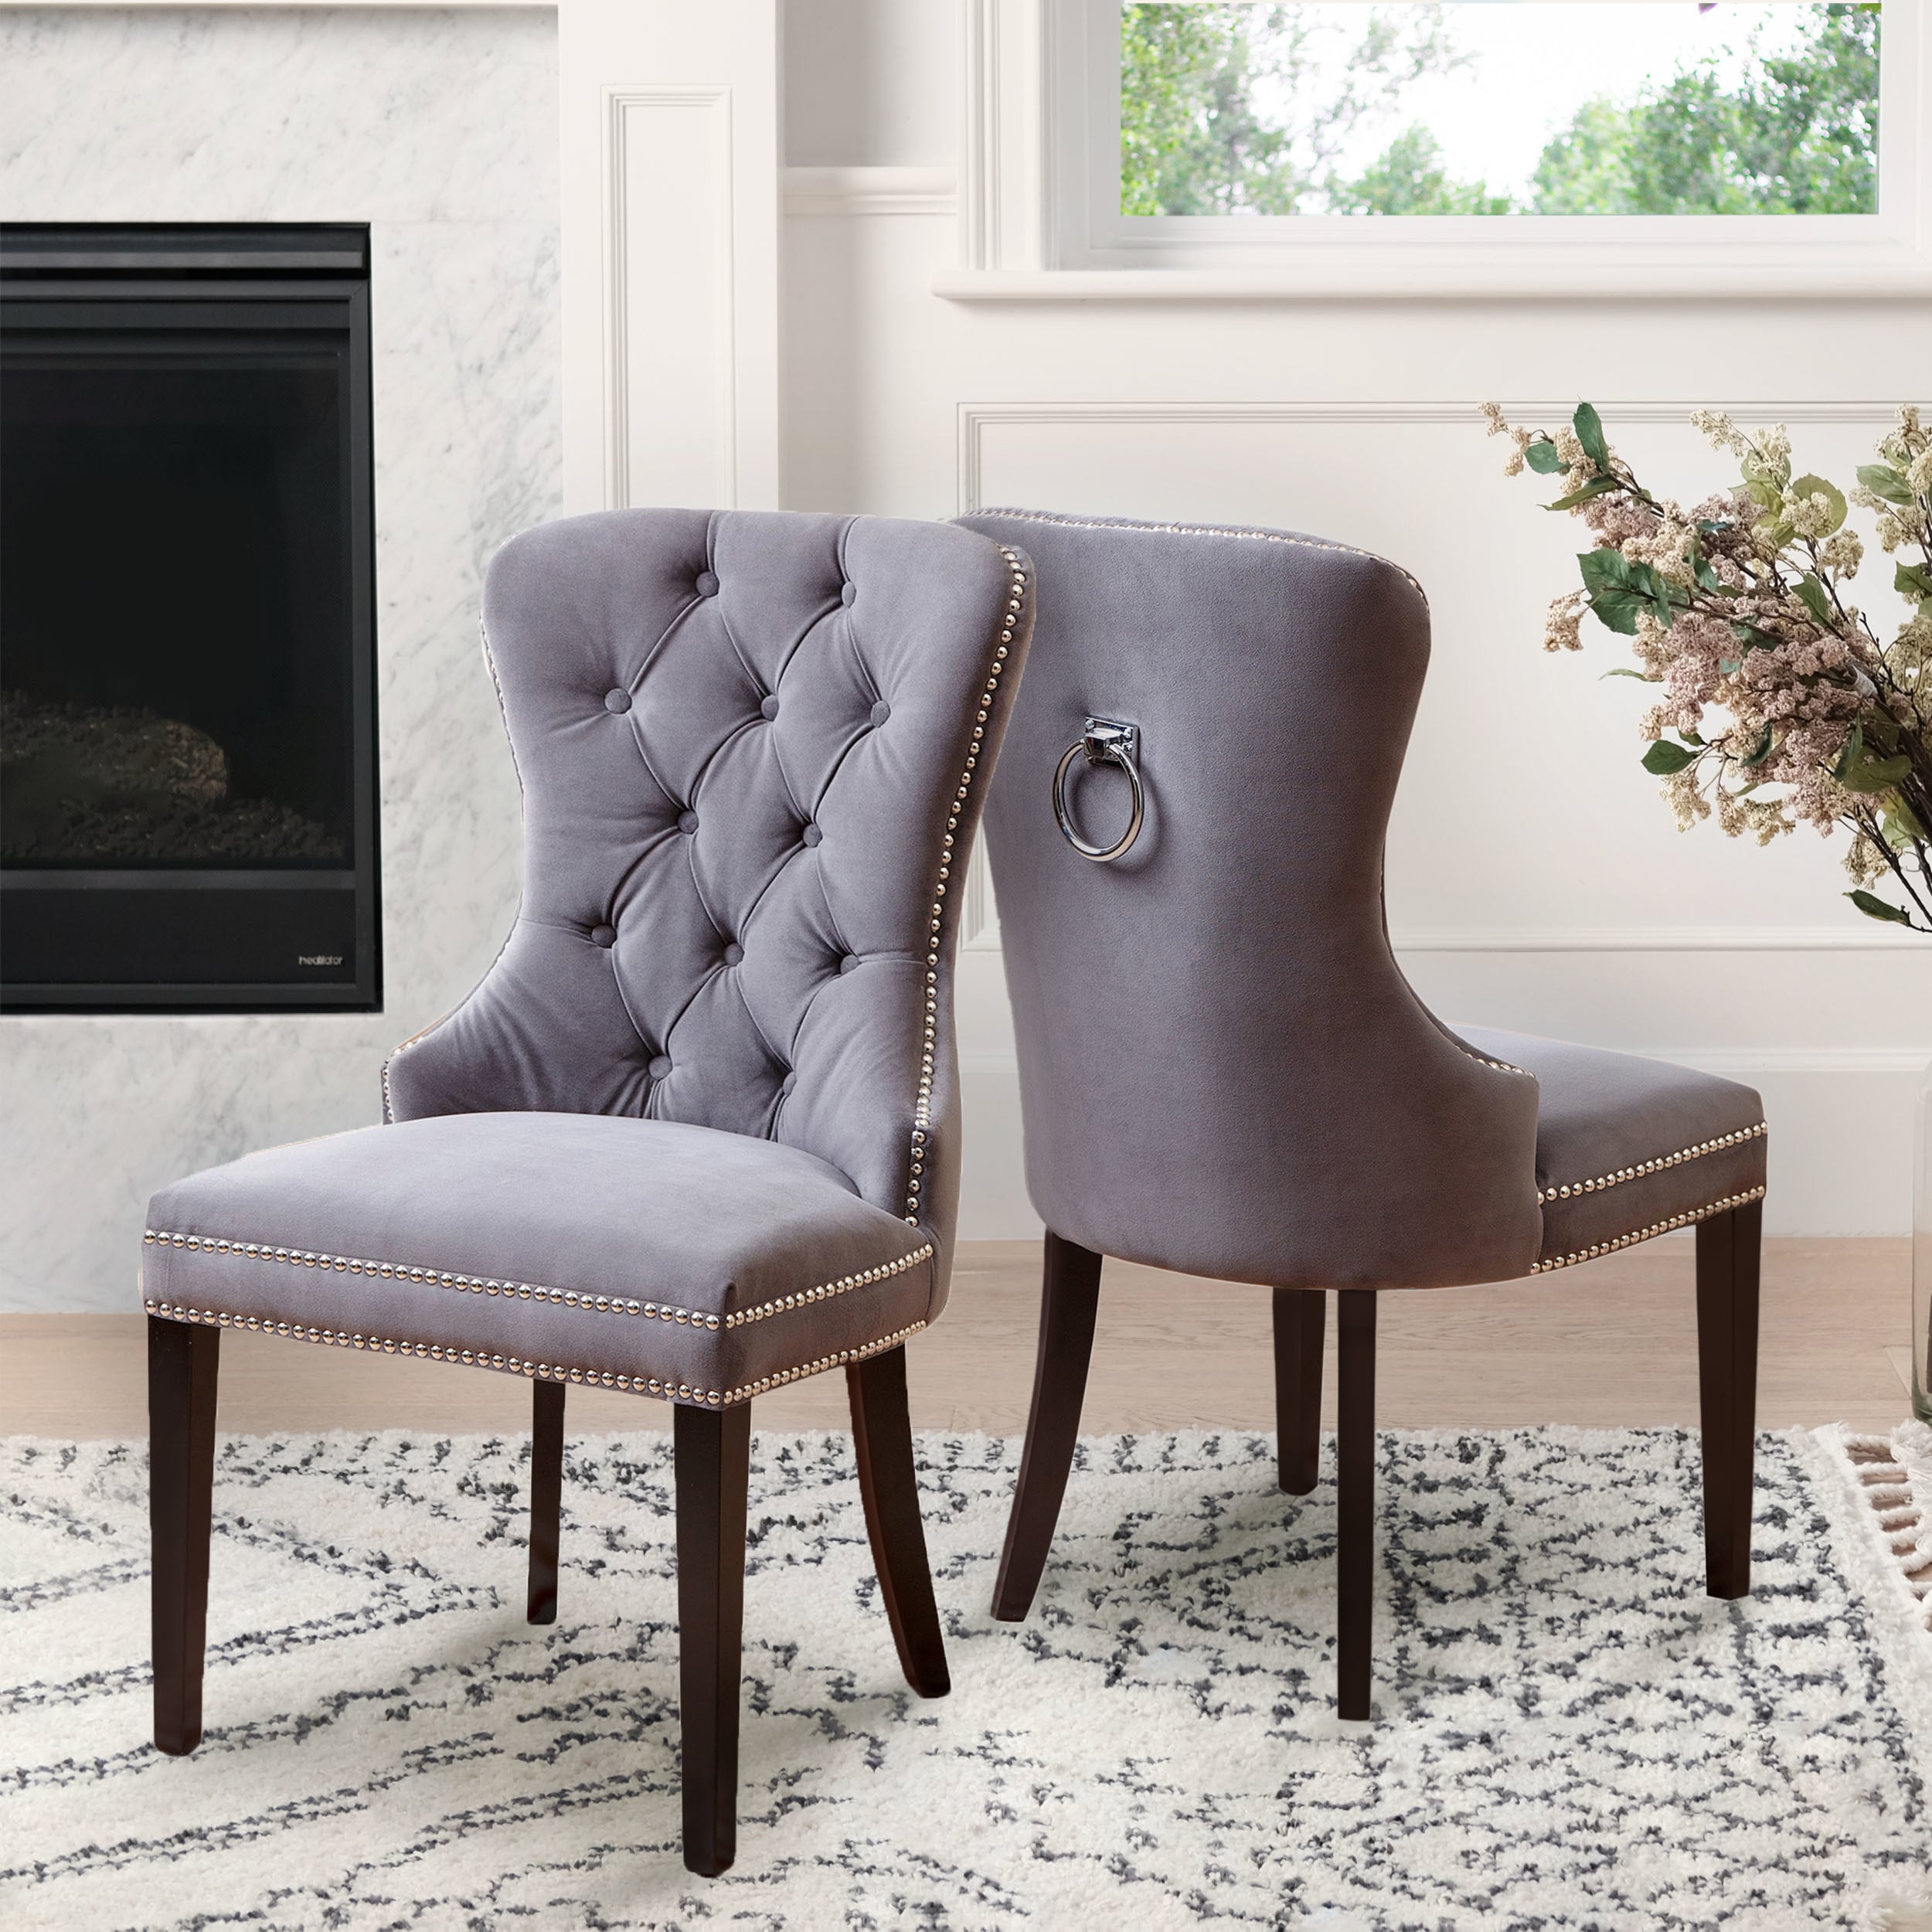 Abbyson Versailles Grey Tufted Dining Chair On Sale Overstock 10855757